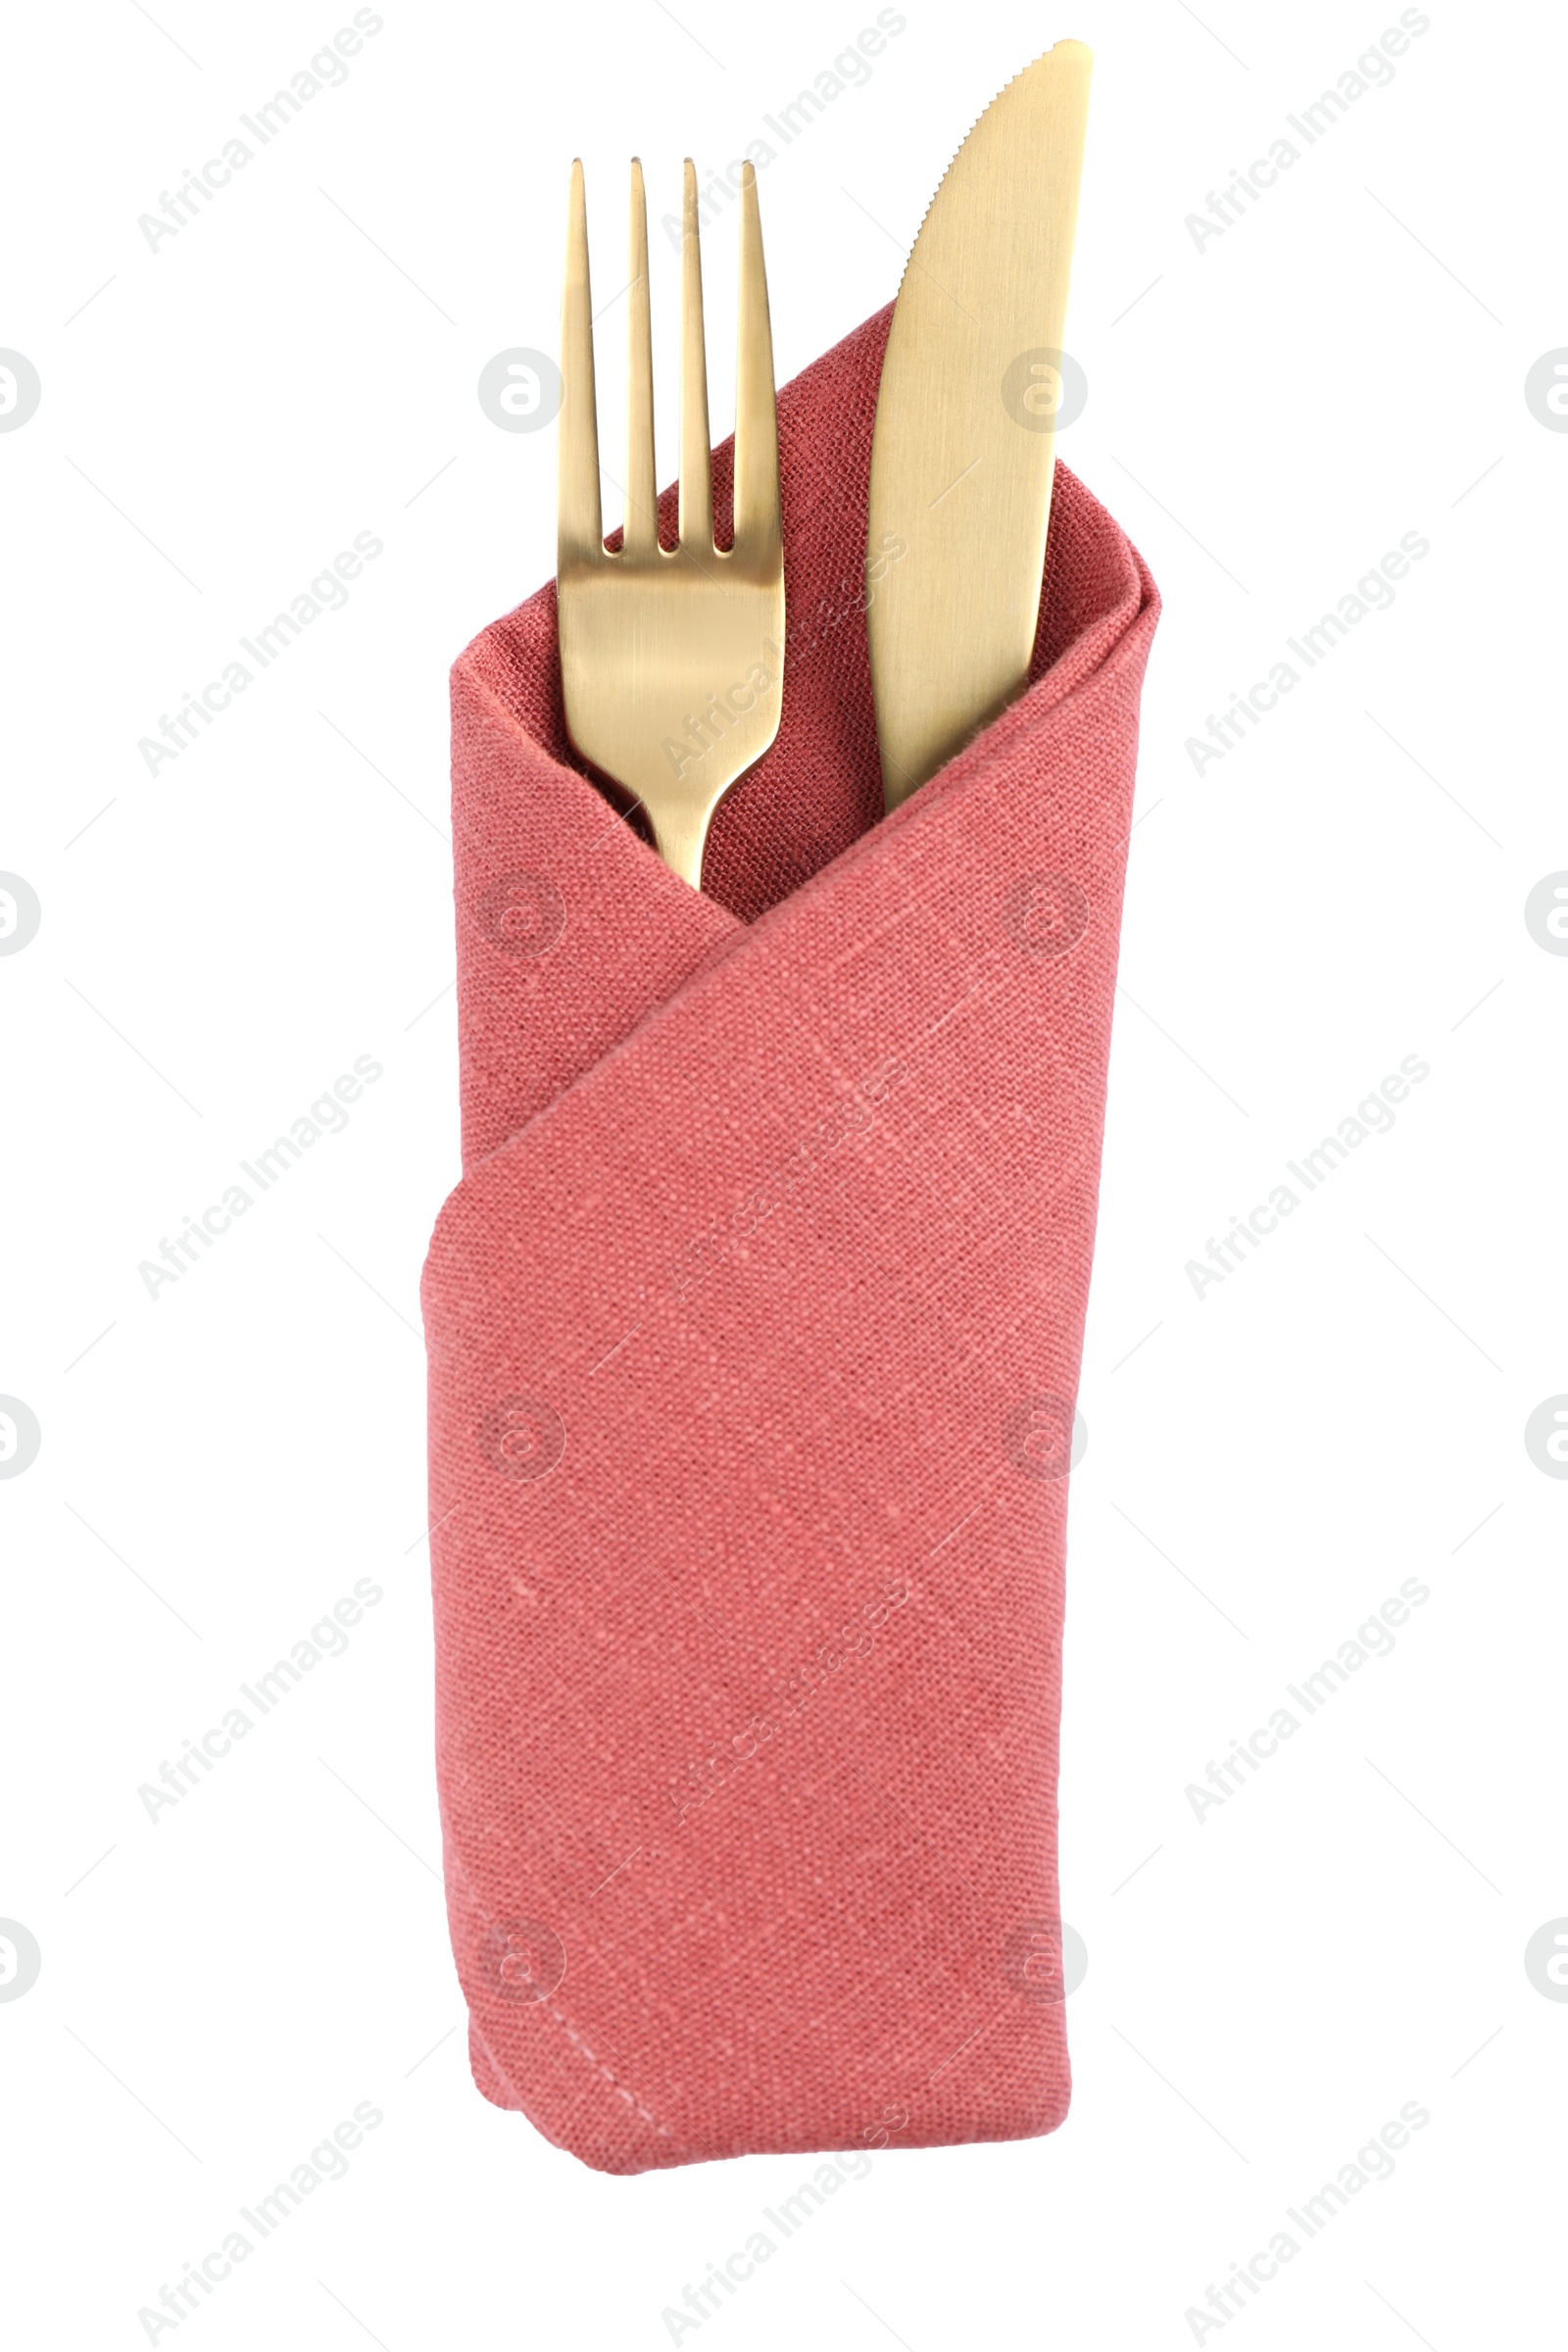 Photo of Golden fork and knife wrapped in coral napkin on white background, top view